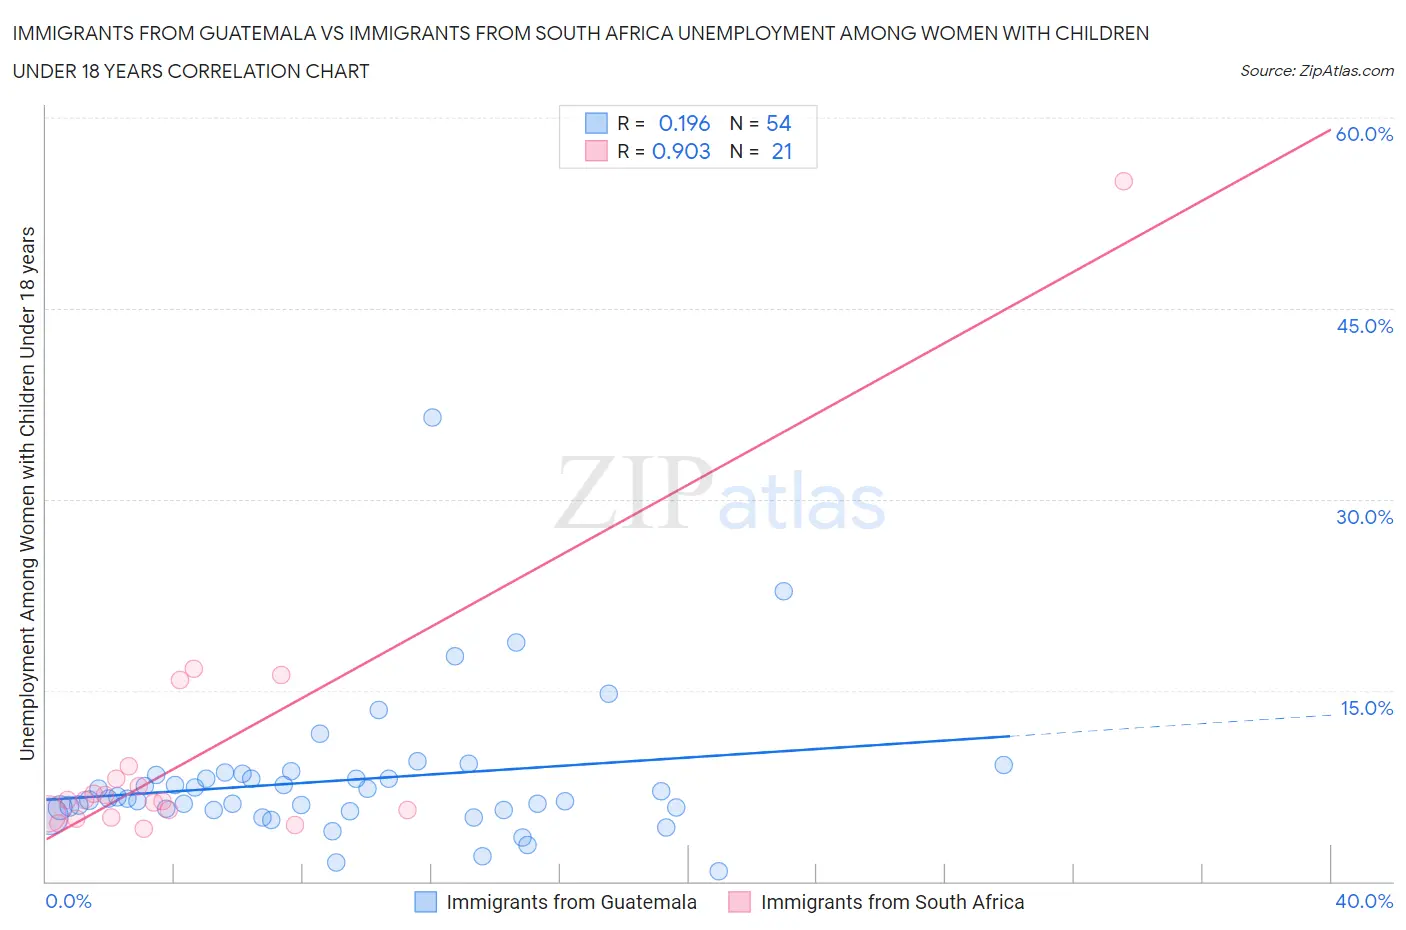 Immigrants from Guatemala vs Immigrants from South Africa Unemployment Among Women with Children Under 18 years